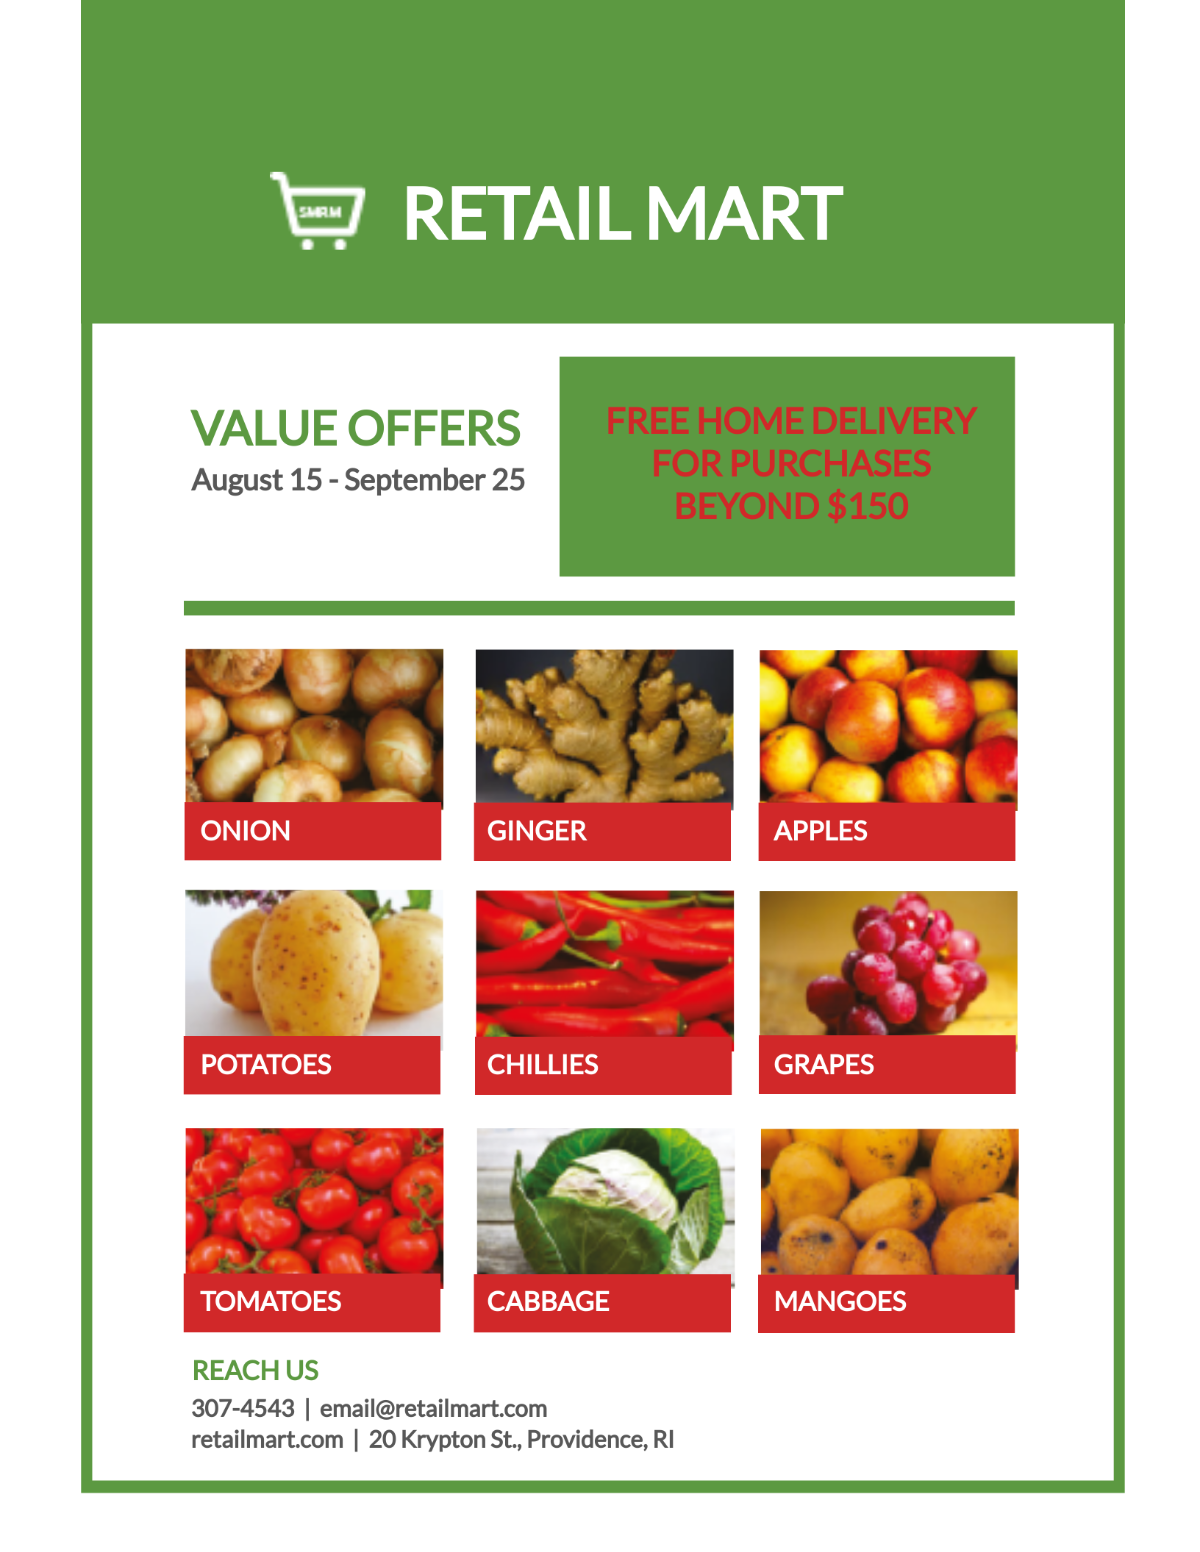 Free Retail Mart Flyer Template